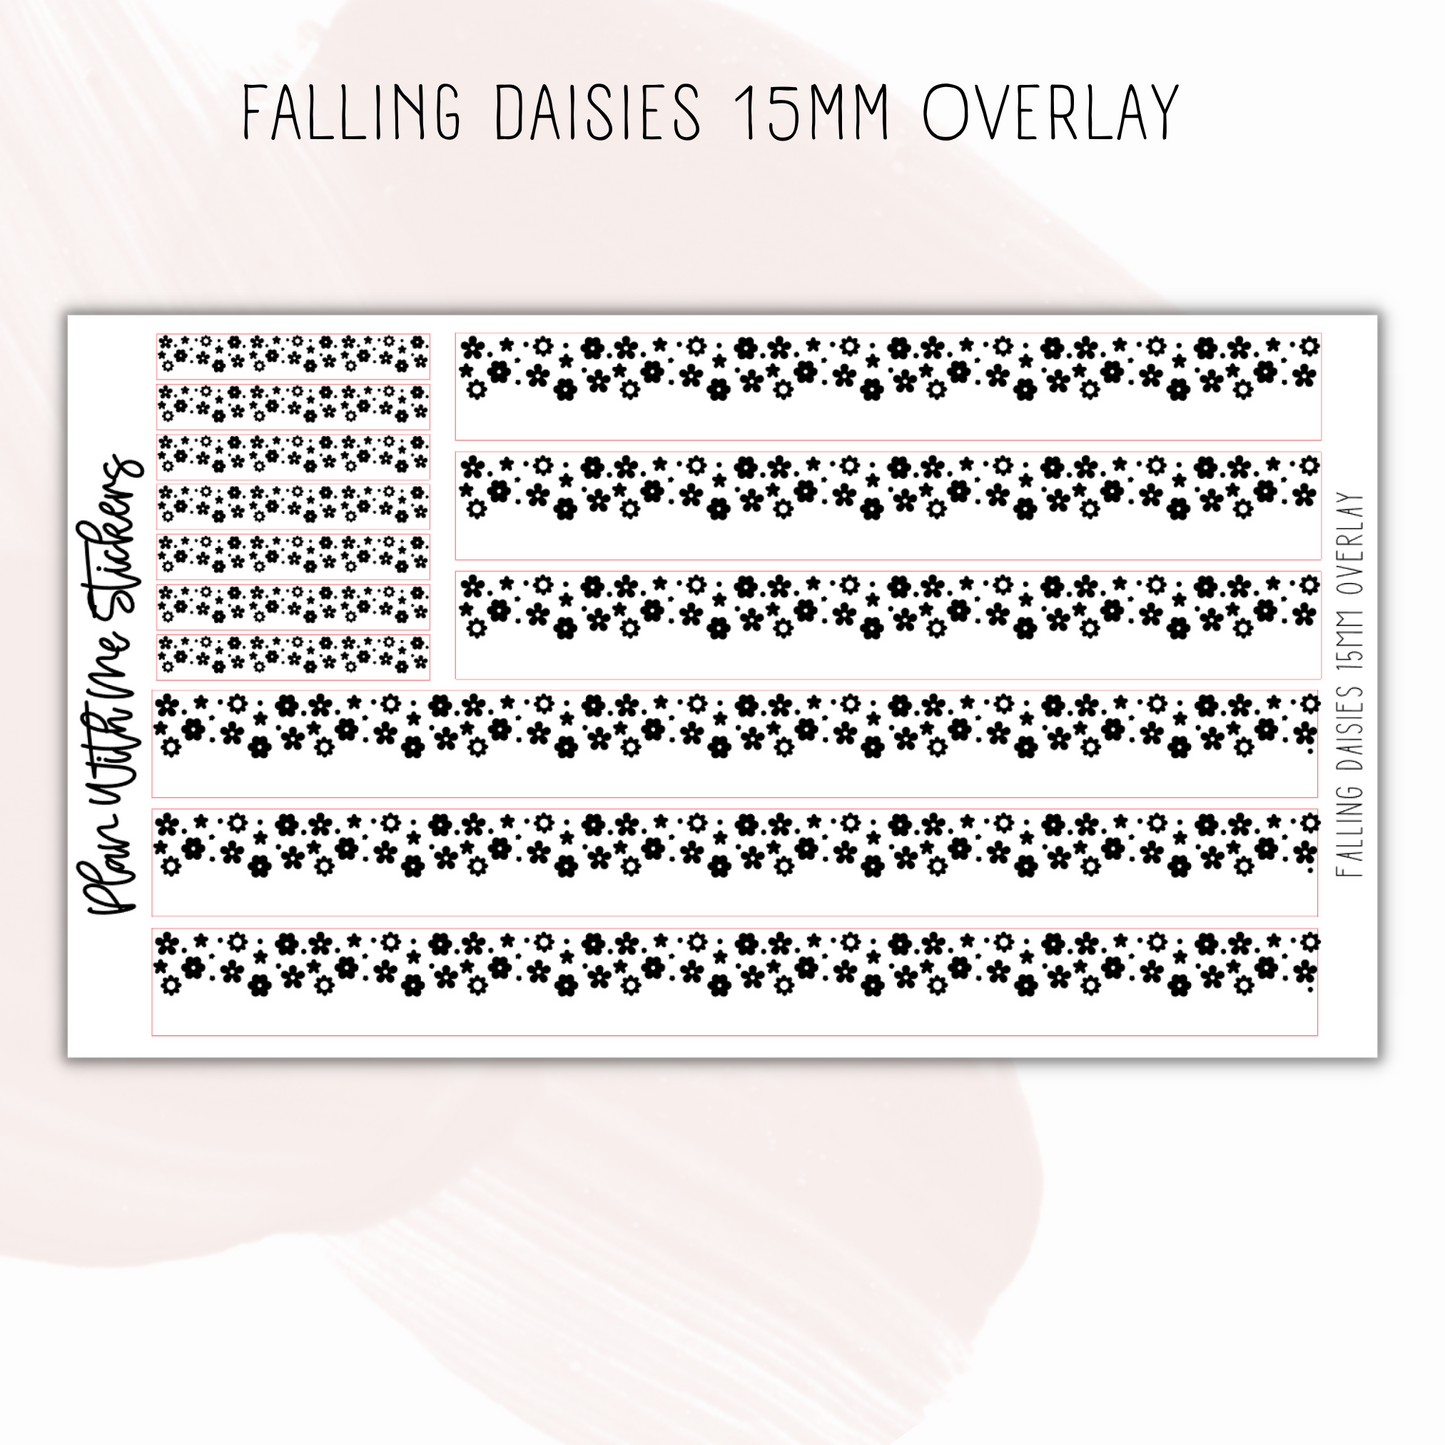 Falling Daisies 15mm Overlay